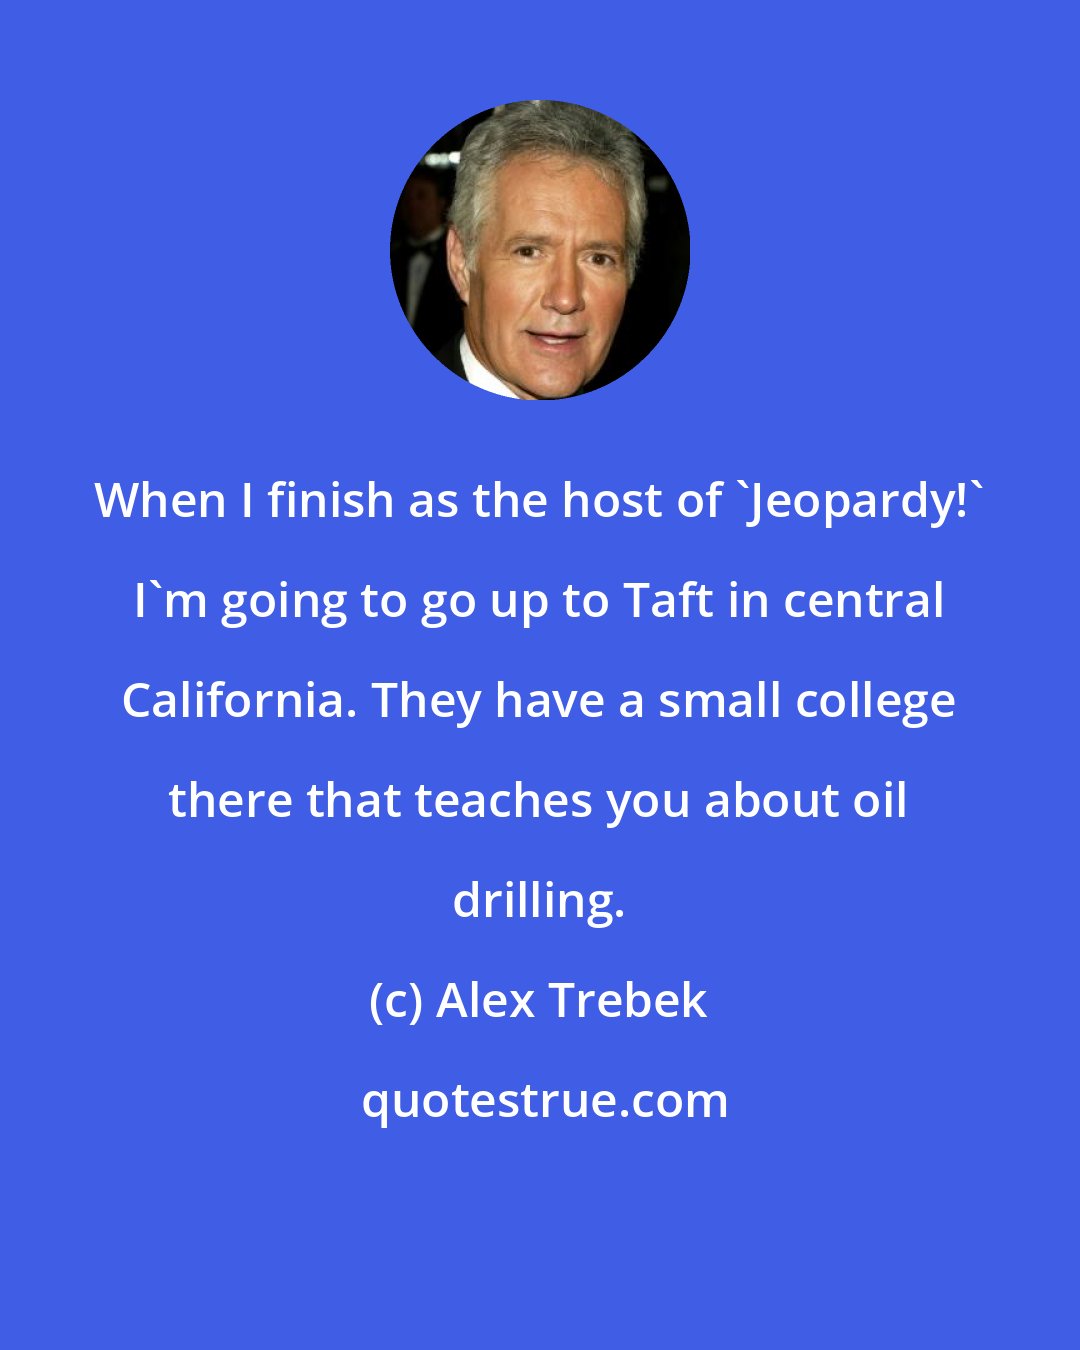 Alex Trebek: When I finish as the host of 'Jeopardy!' I'm going to go up to Taft in central California. They have a small college there that teaches you about oil drilling.